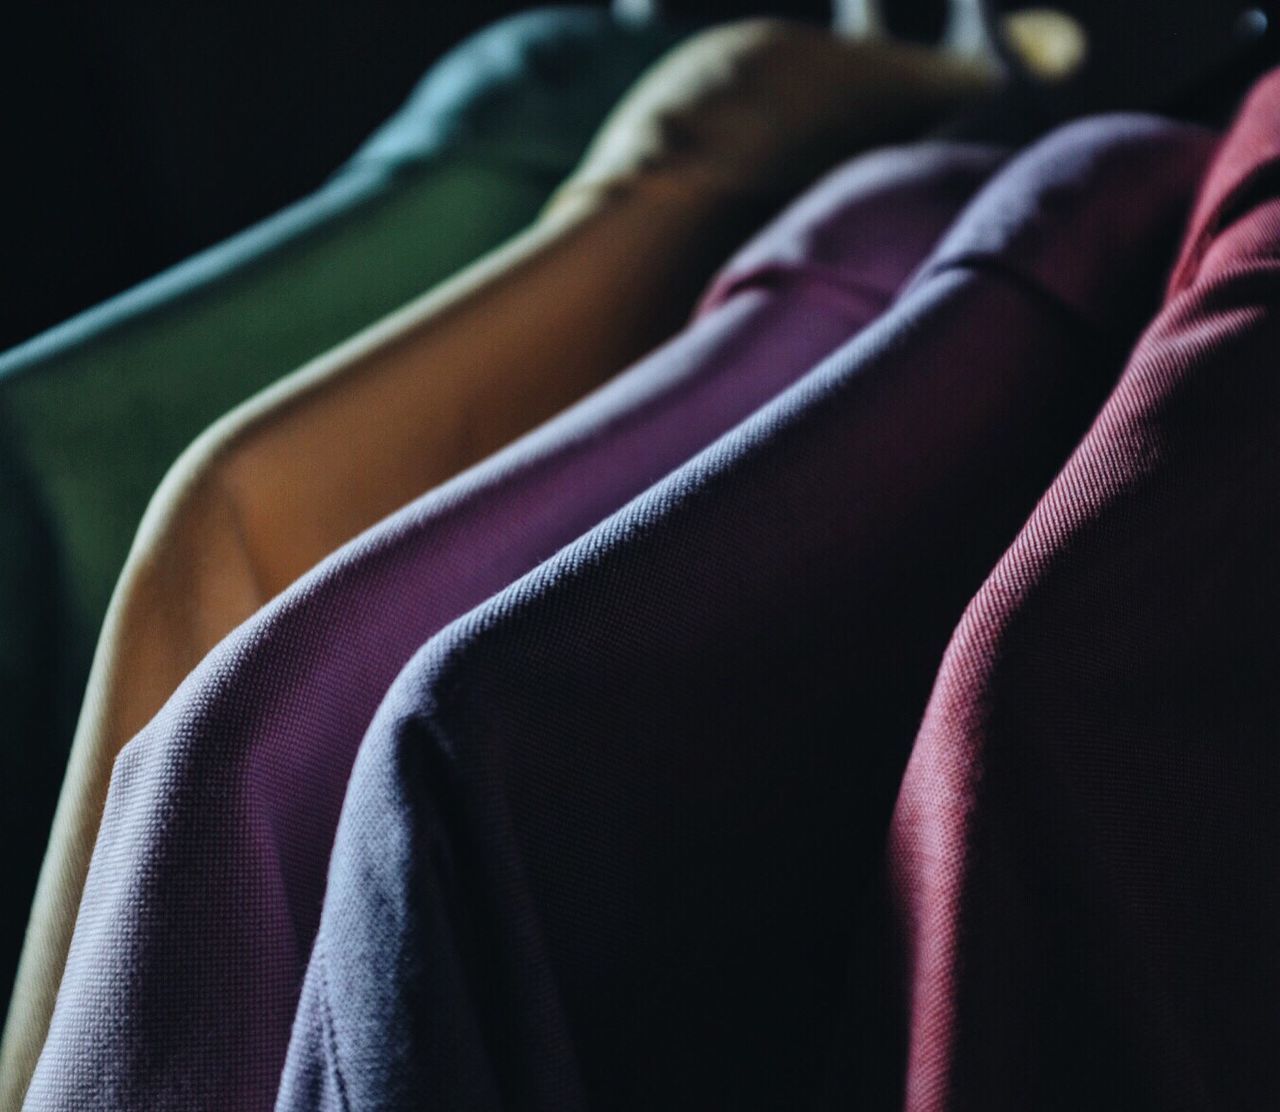 CLOSE-UP OF MULTI COLORED CLOTHES HANGING ON CLOTHESLINE